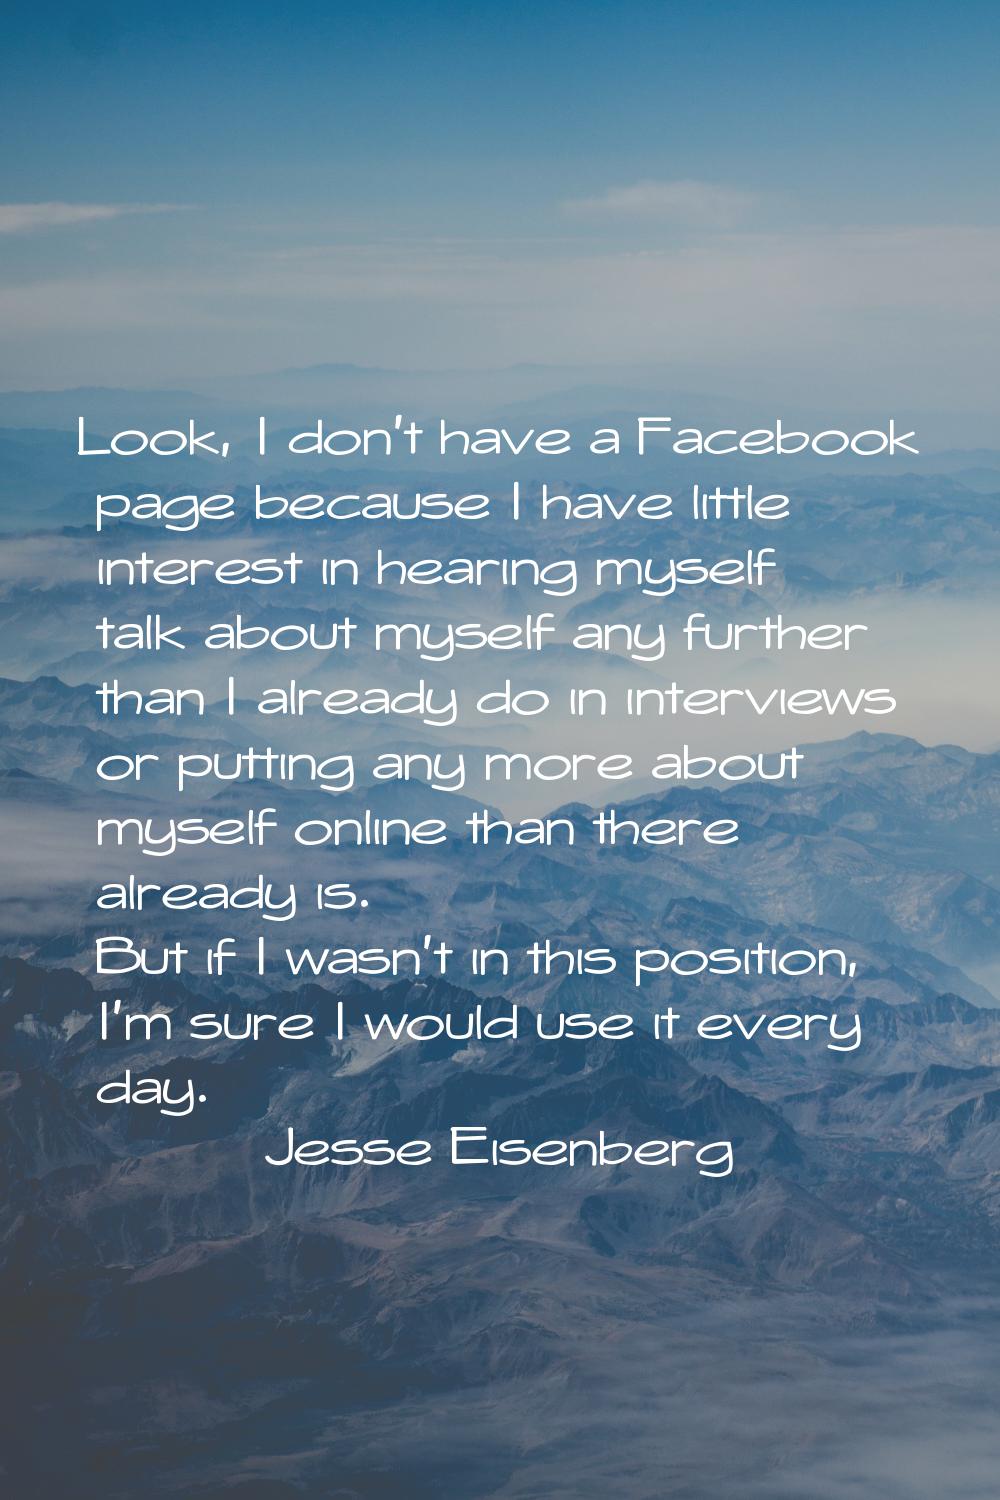 Look, I don't have a Facebook page because I have little interest in hearing myself talk about myse